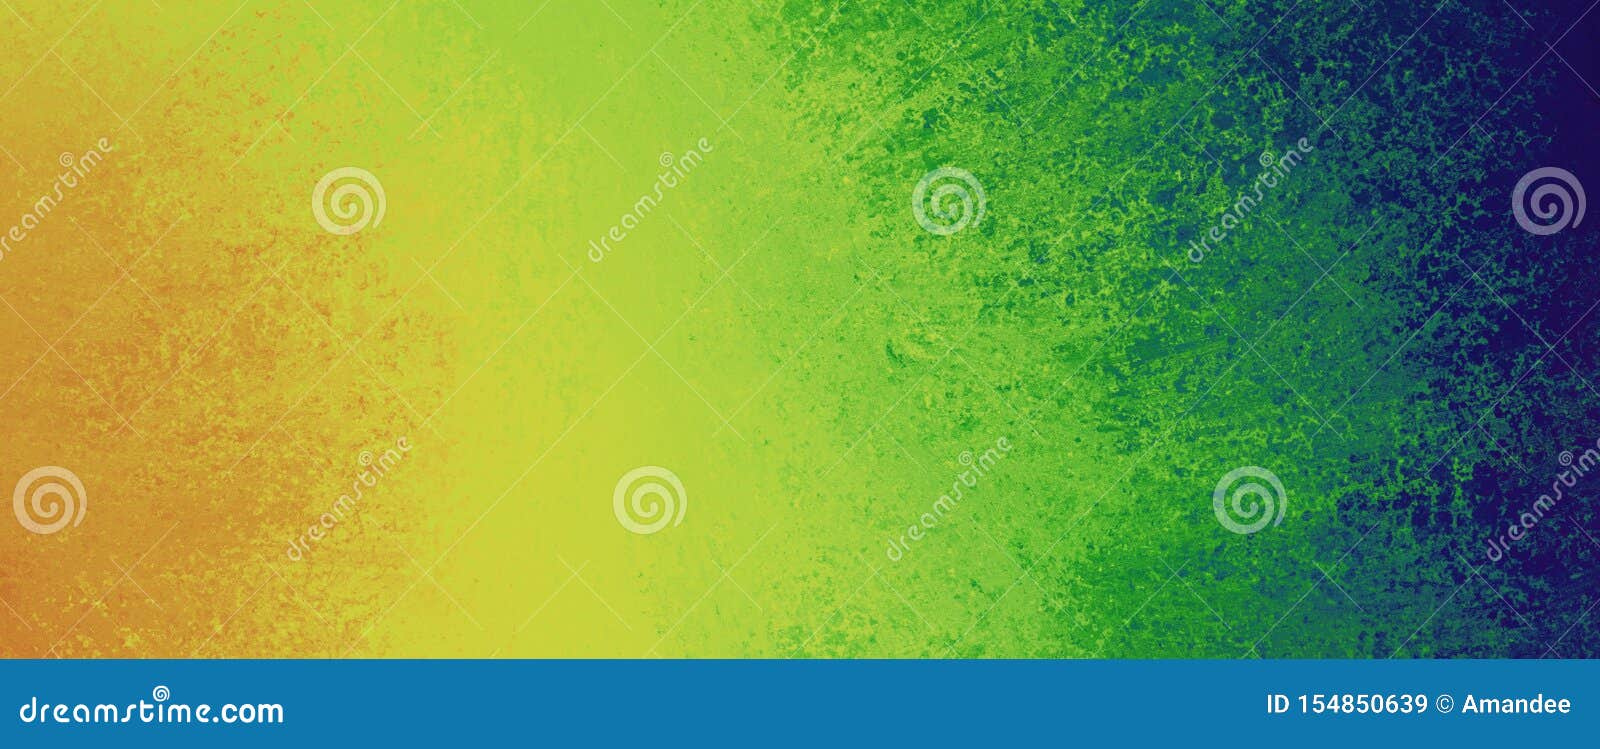 background  with orange yellow green and blue sponged paint texture in graphic art layout, creative fun and bright color abs